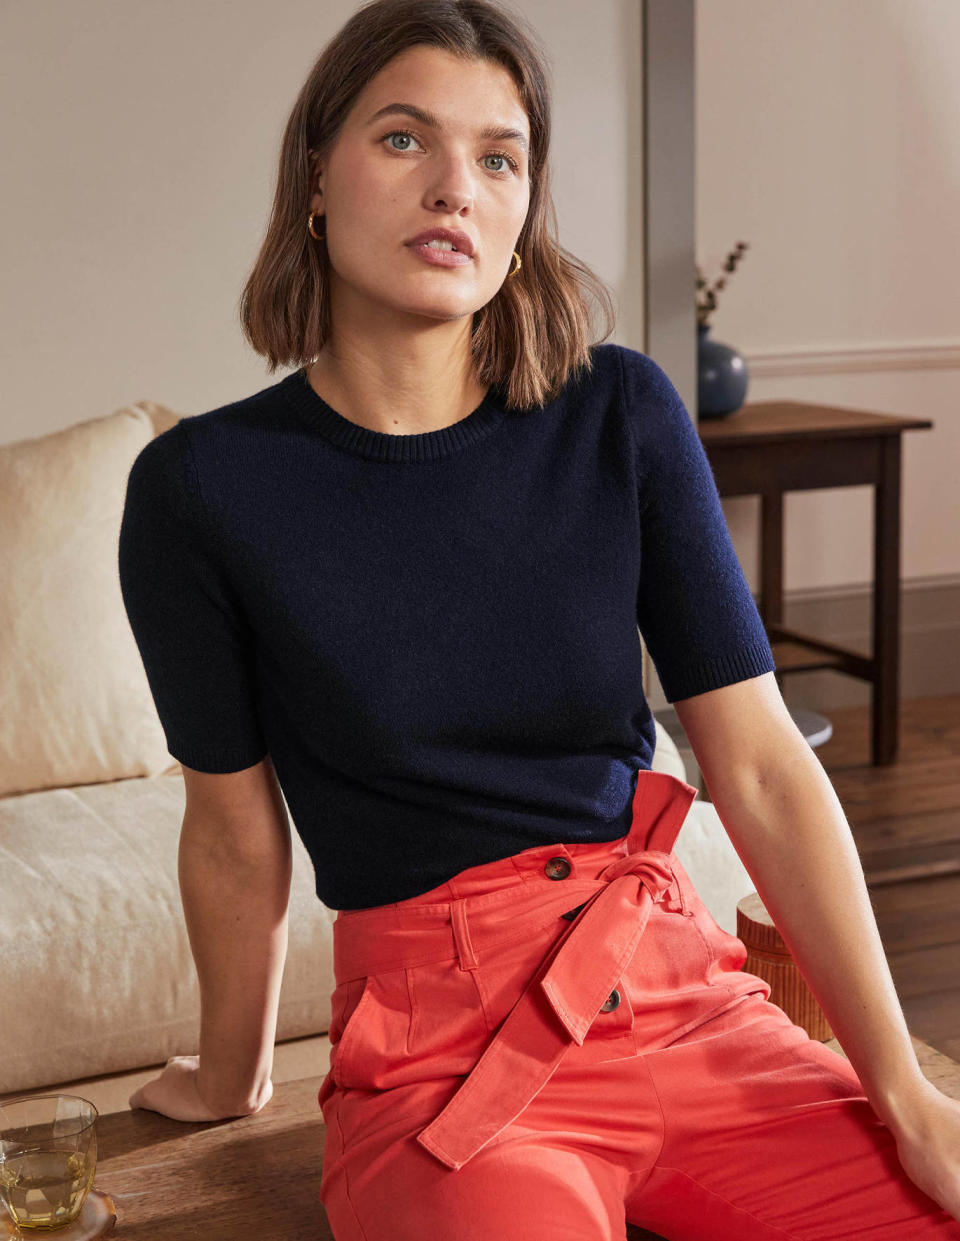 It comes in eight different shades, from classic navy and black to statement pink and green. (Boden)